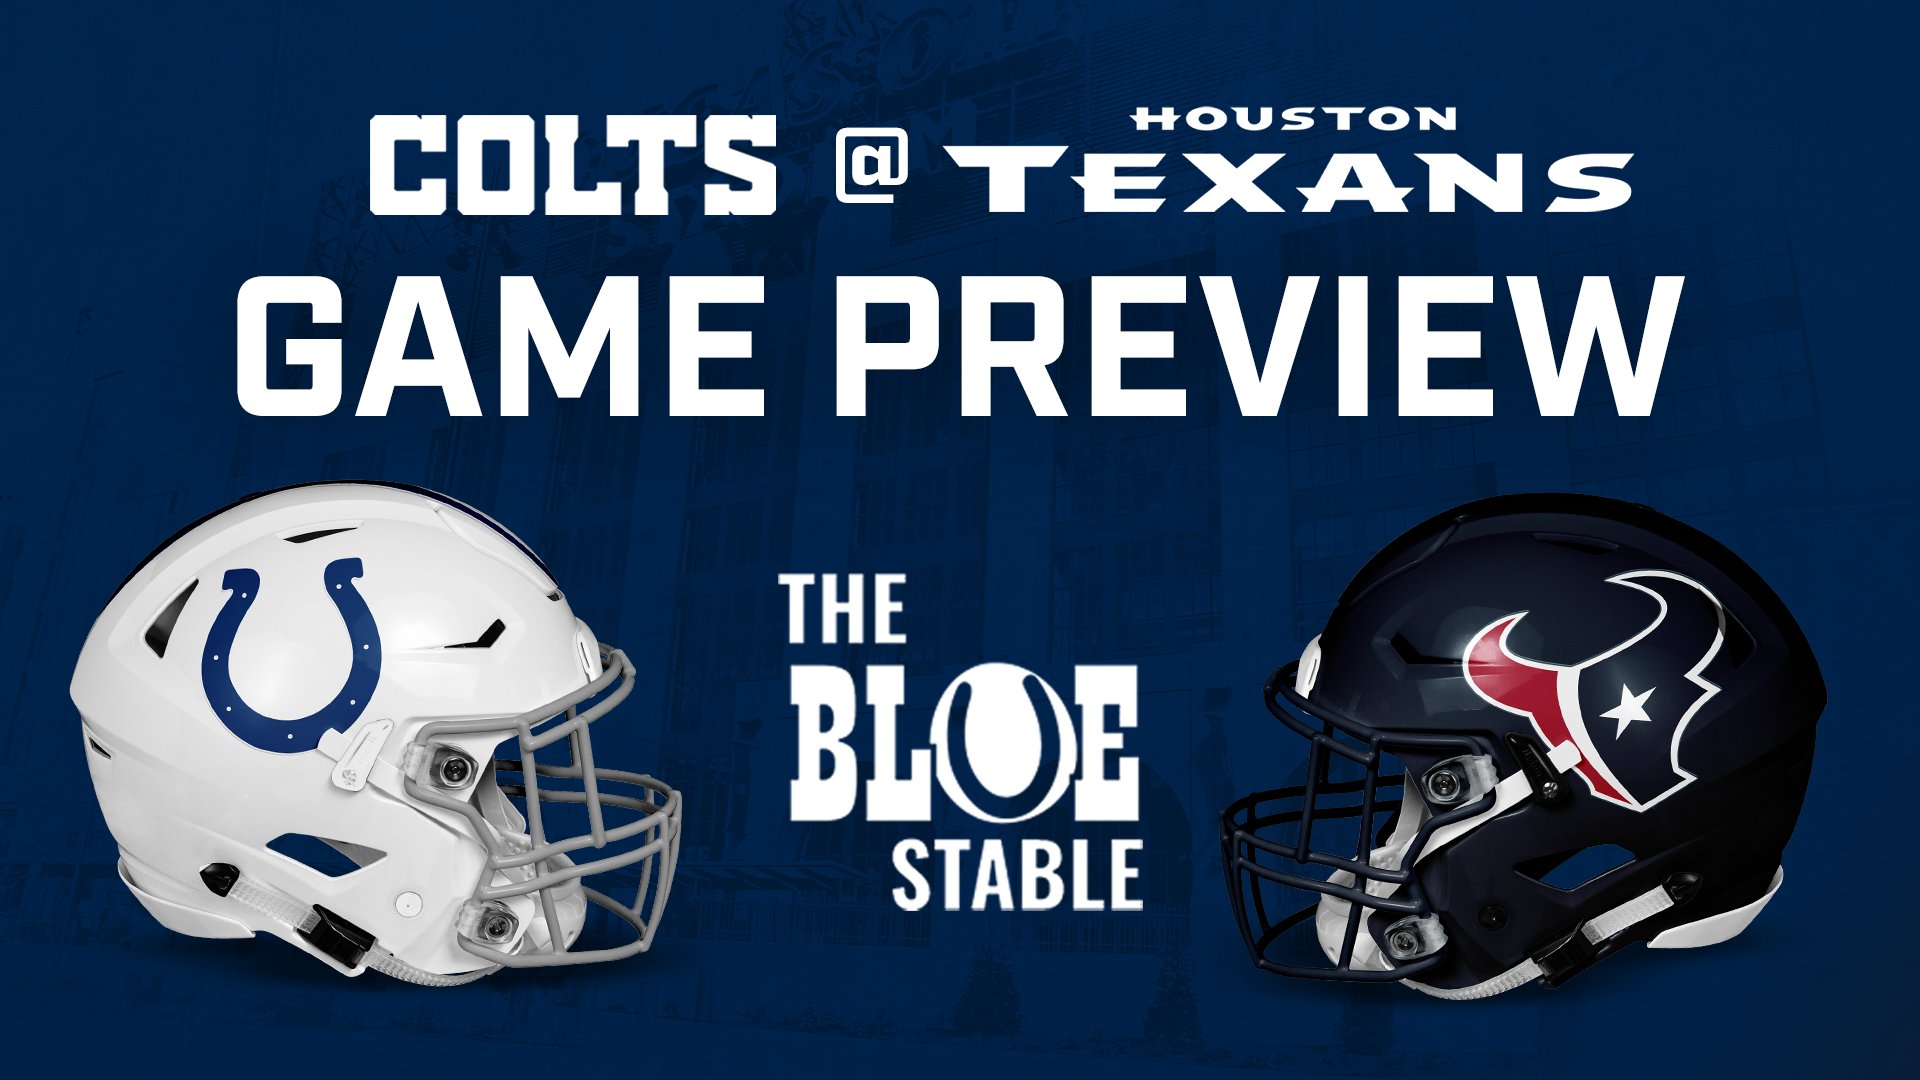 Week 2 Game Preview: Colts at Texans